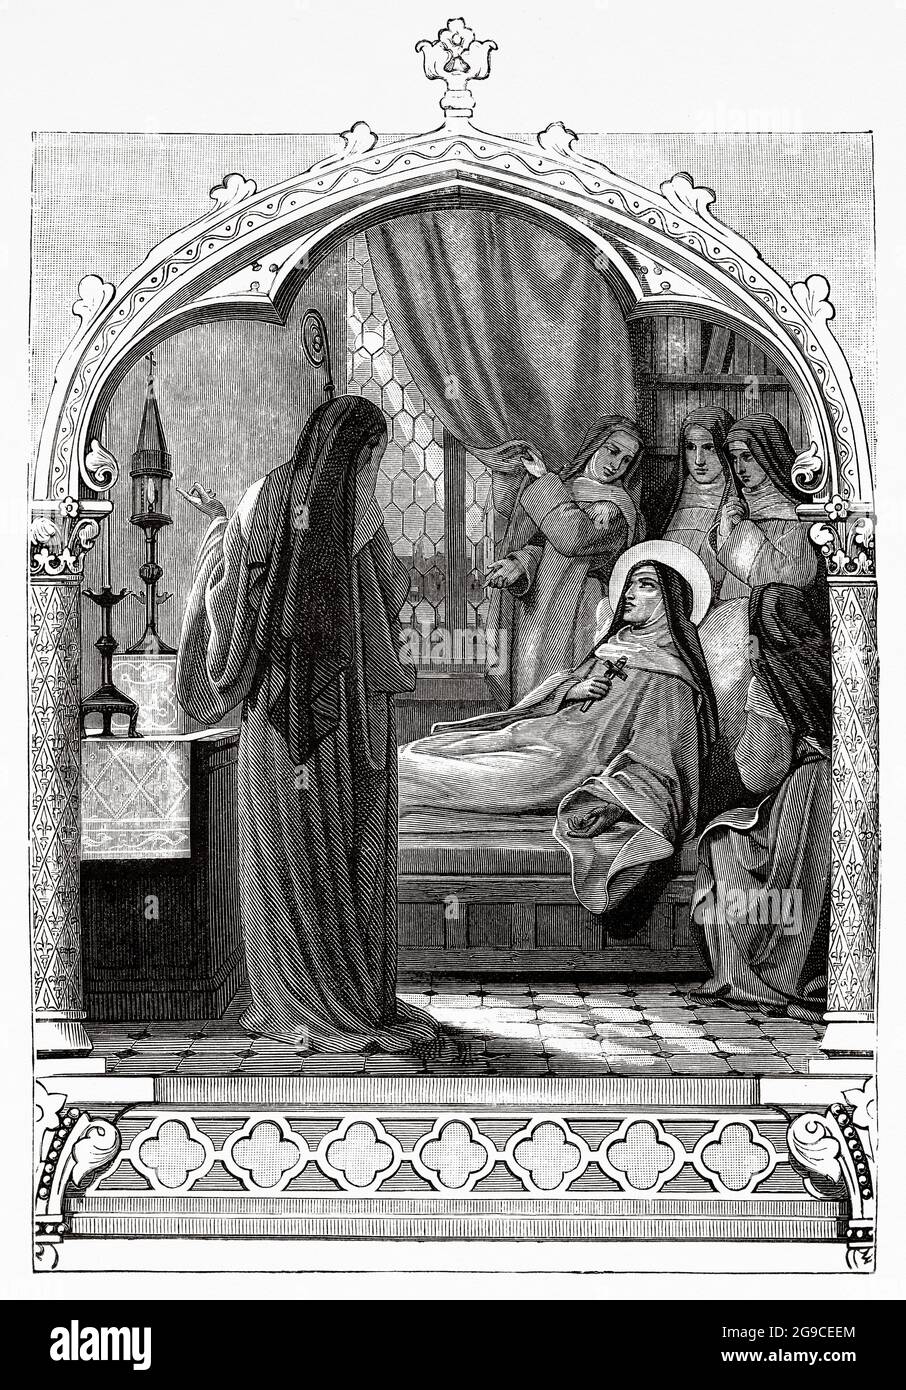 Sainte Julienne de Mont-Cornillon (Retinnes 1193 - Fosses-la-Ville 1258) He dedicated much of his life to promoting the Corpus Christi devotion, whose feast was established in 1264 by Pope Urban IV. Old 19th century engraved illustration from Jesus Christ by Veuillot 1881 Stock Photo